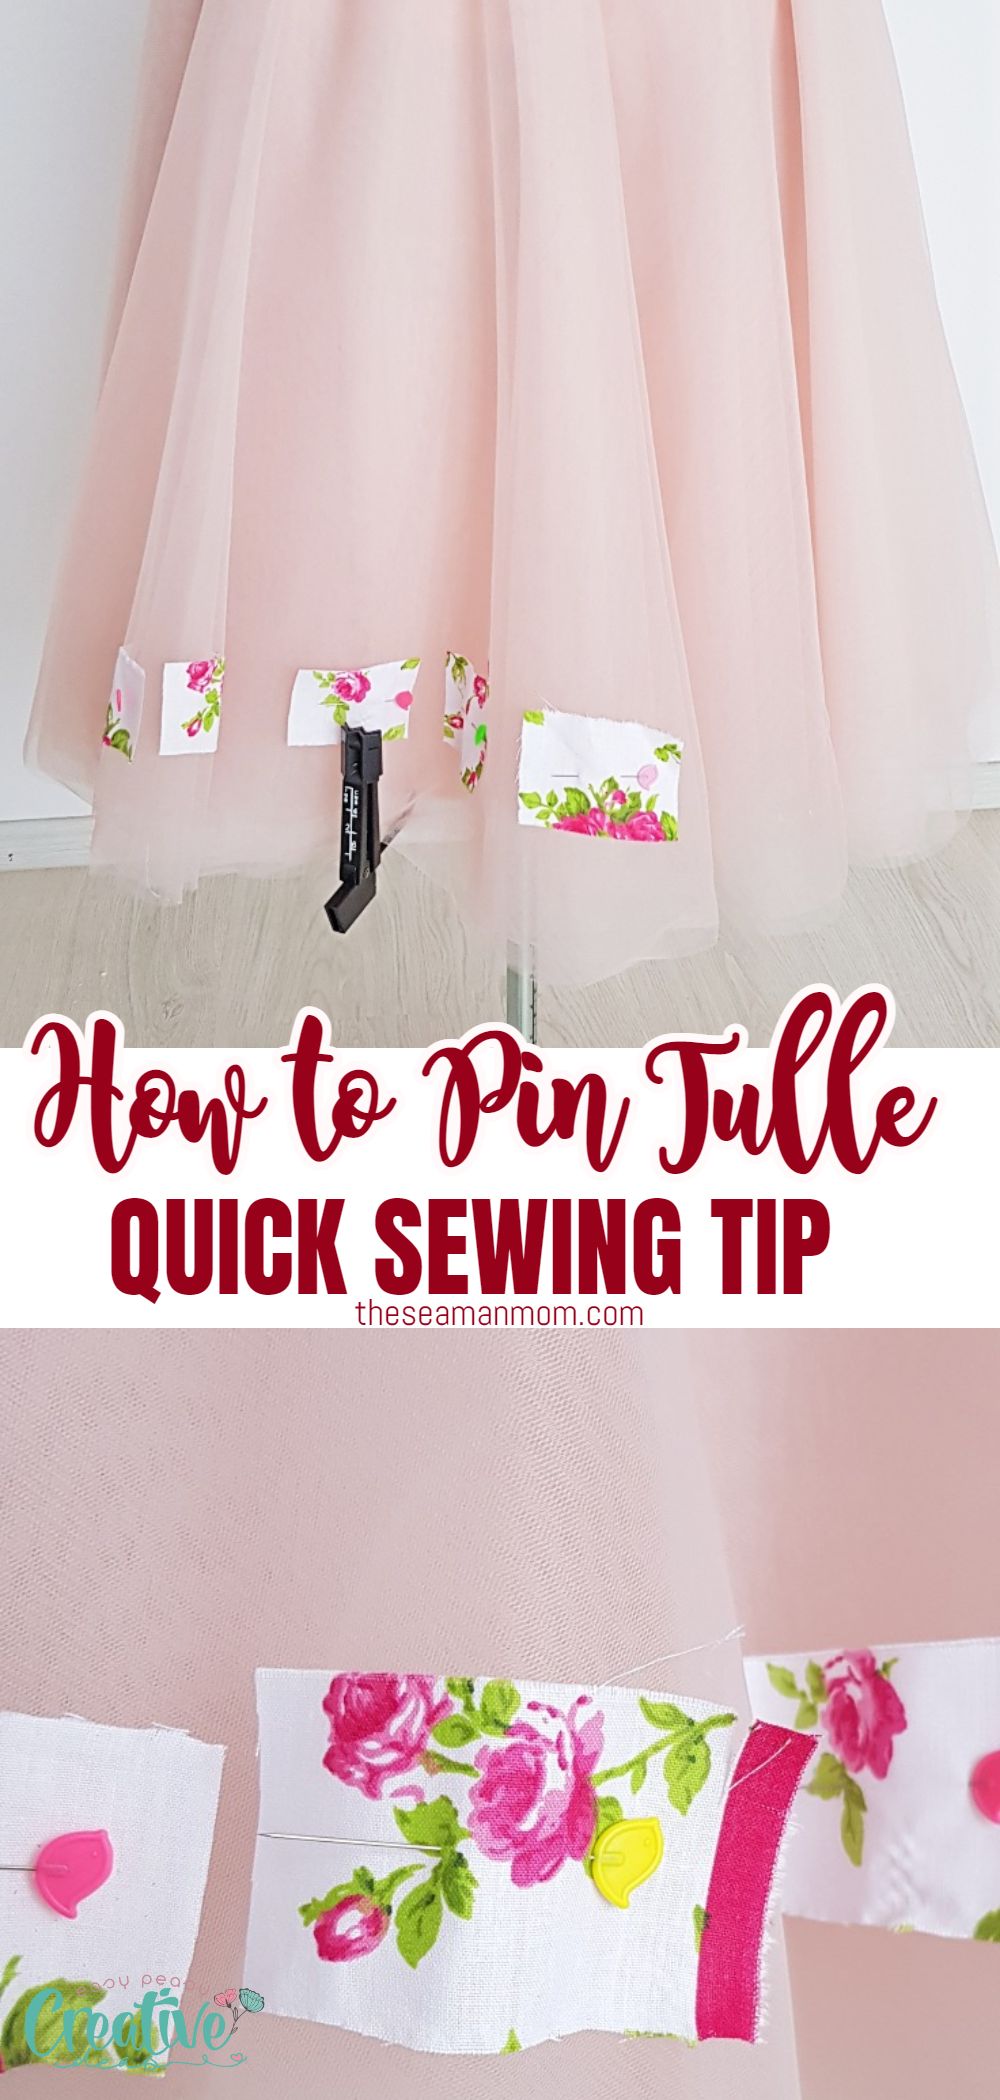 Sewing and hemming tulle and other thin, slippery fabrics can be tricky and time consuming, especially when dealing with multiple layers. Here I'll share a quick tip on how to pin tulle, that will help you cut, hem and sew tulle without any hassle! via @petroneagu